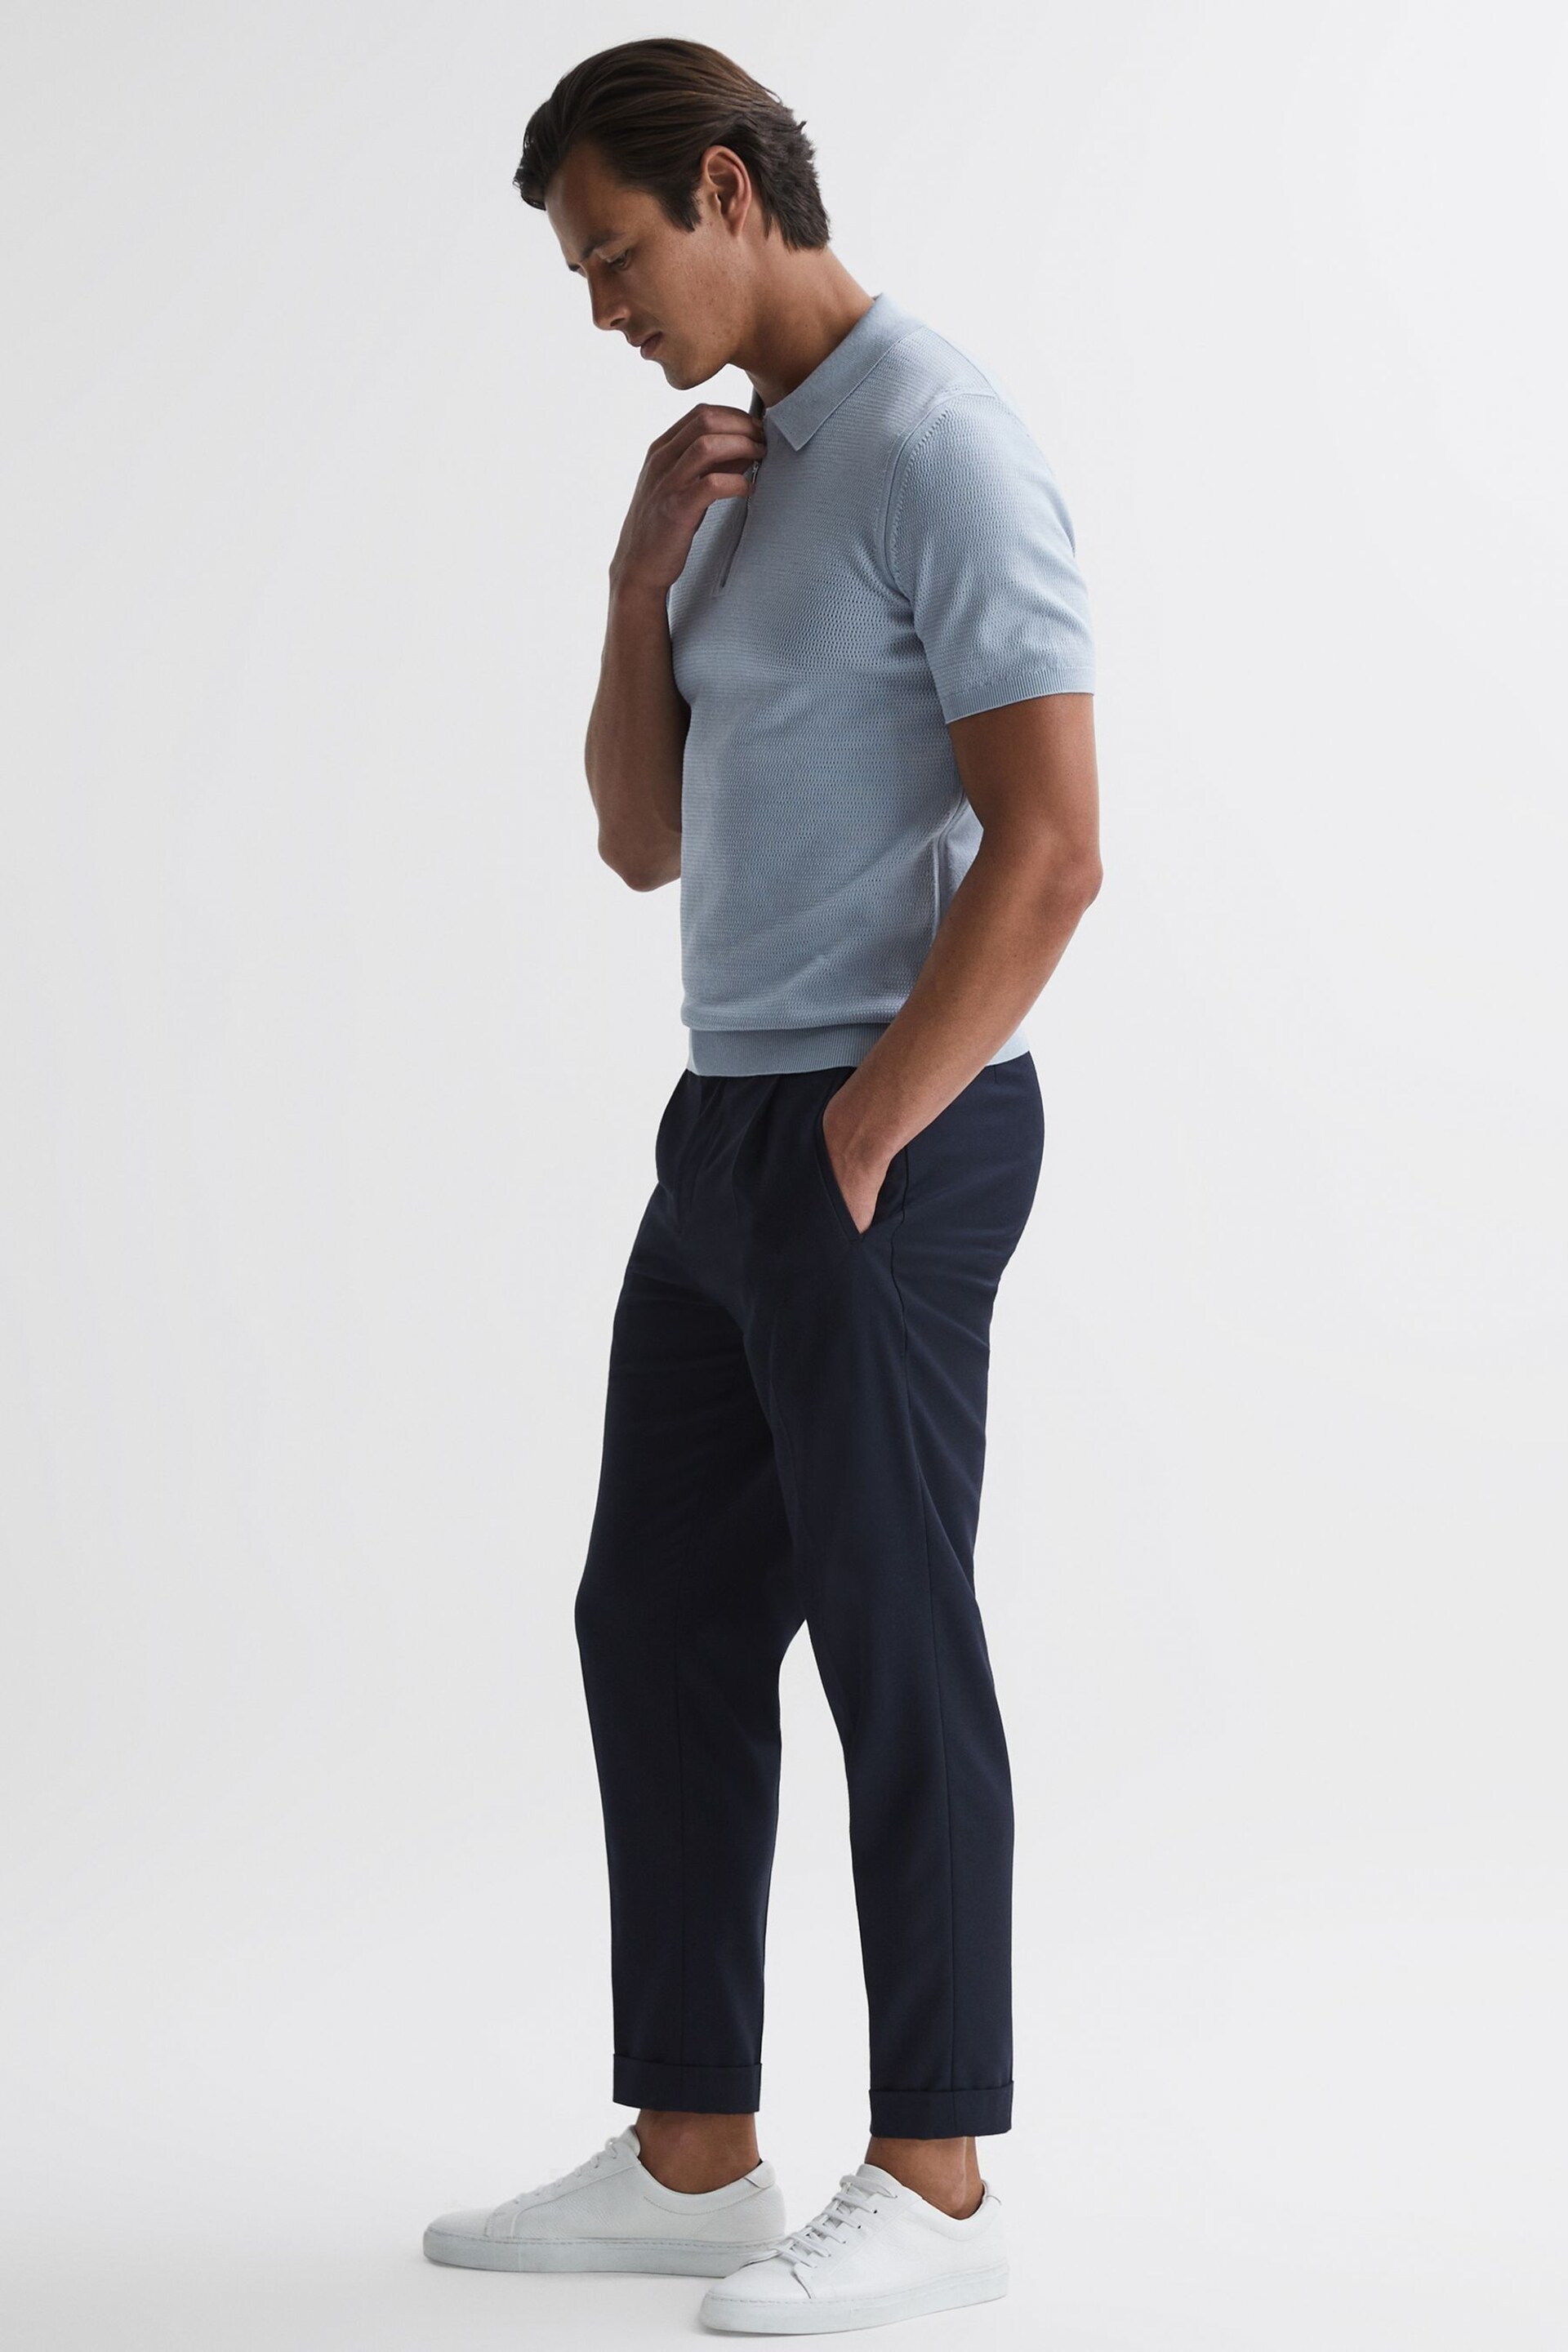 Reiss Soft Blue Fizz Knitted Half-Zip Polo T-Shirt - Image 3 of 5